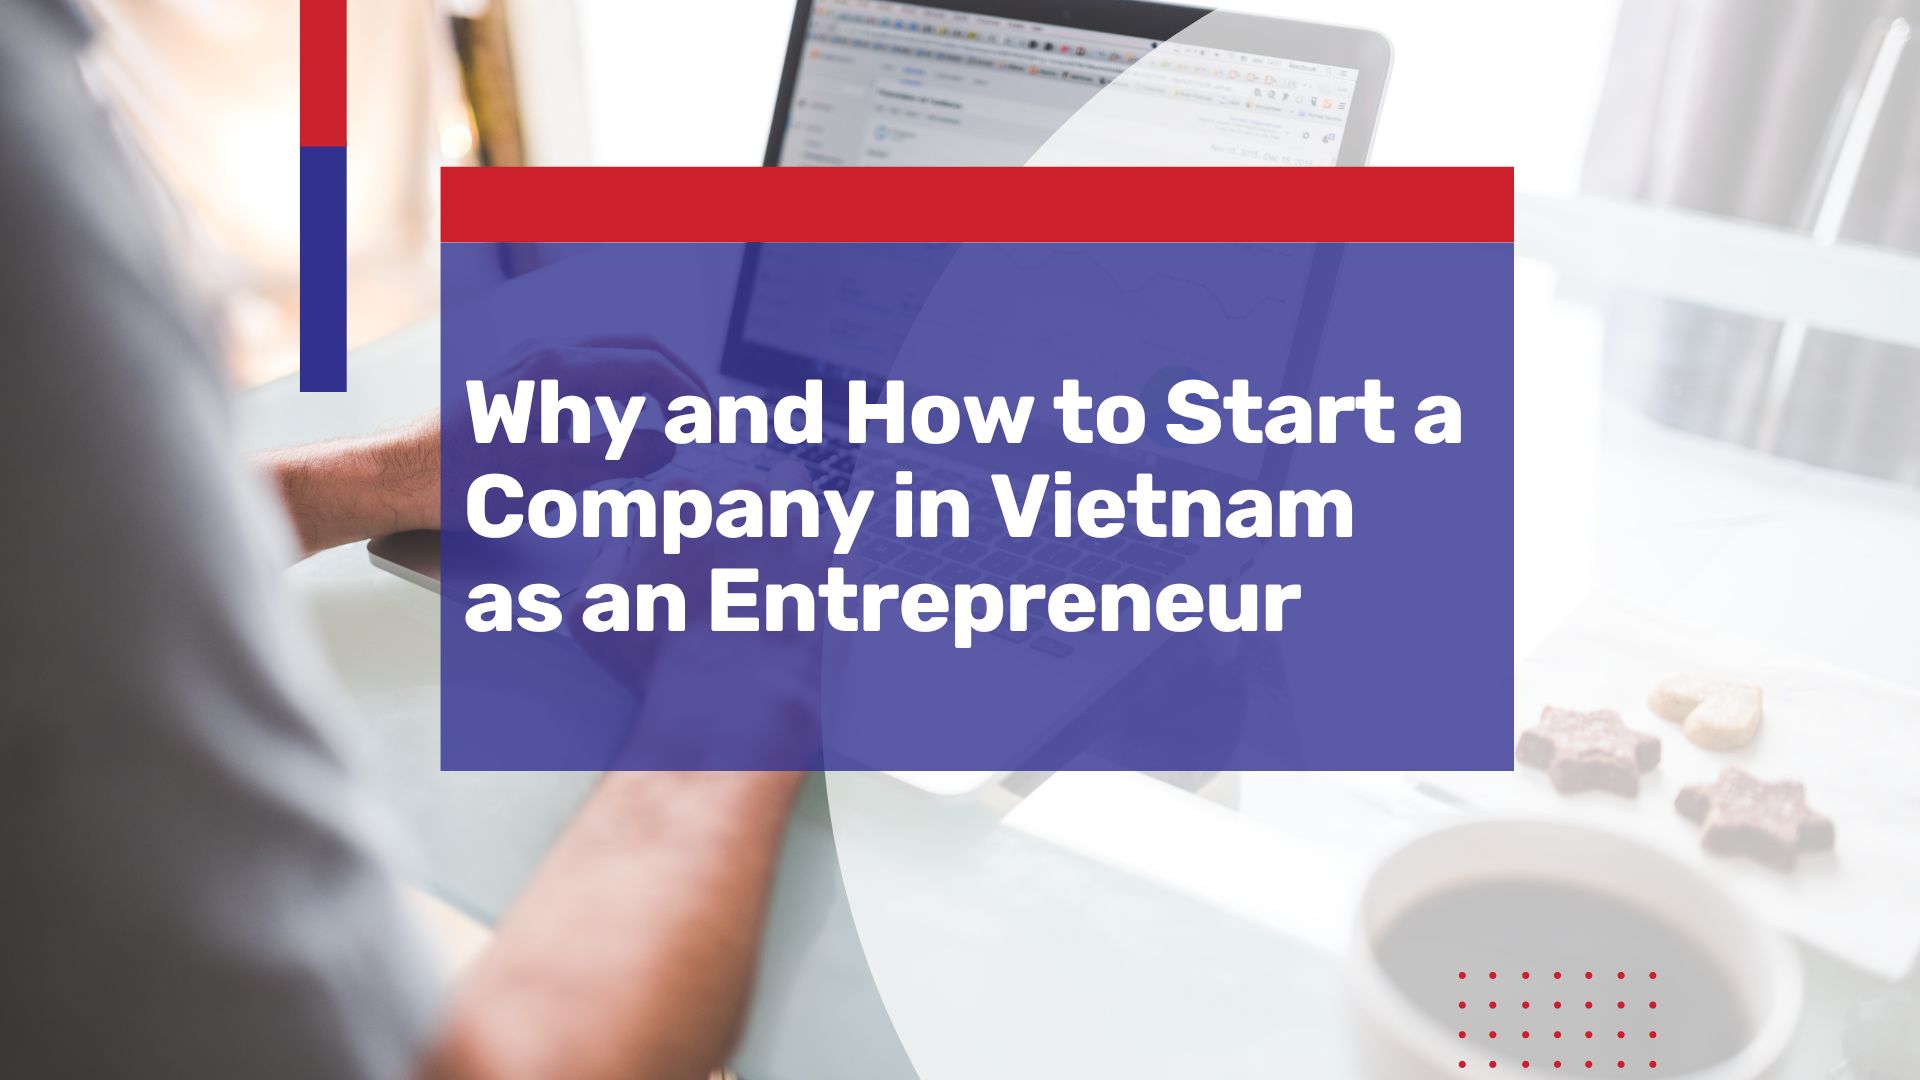 Entrepreneurship in Vietnam influencing the startup culture in Southeast Asia